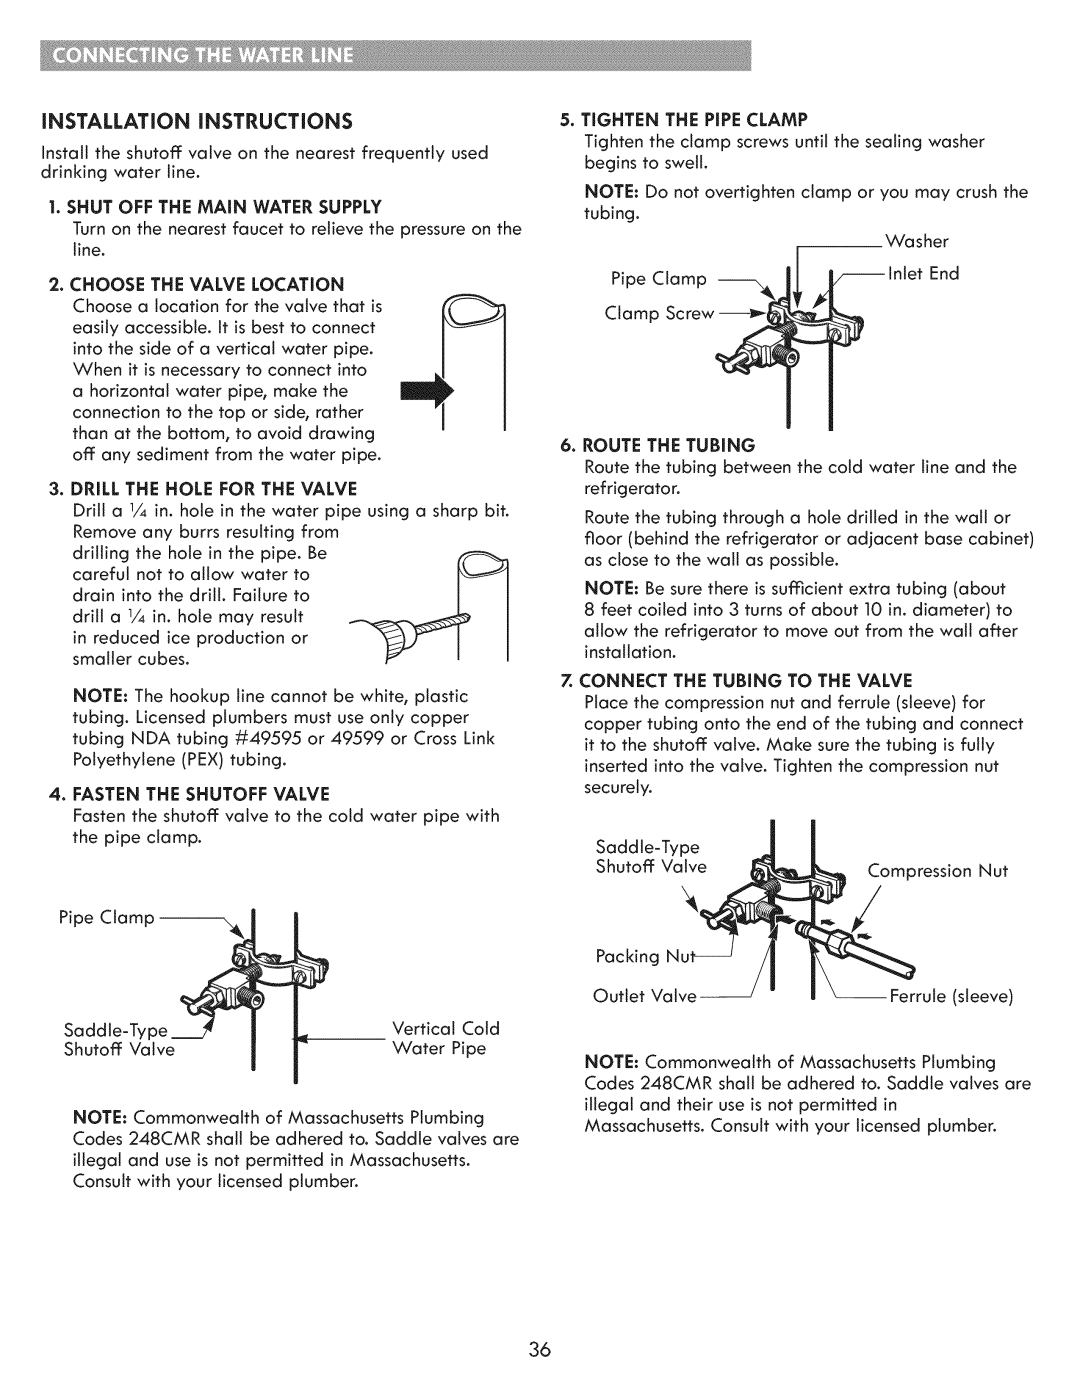 Kenmore 795.7205 manual iNSTALLATiON iNSTRUCTiONS, Shut Off The Main Water Supply, Drill The Hole For The Valve 